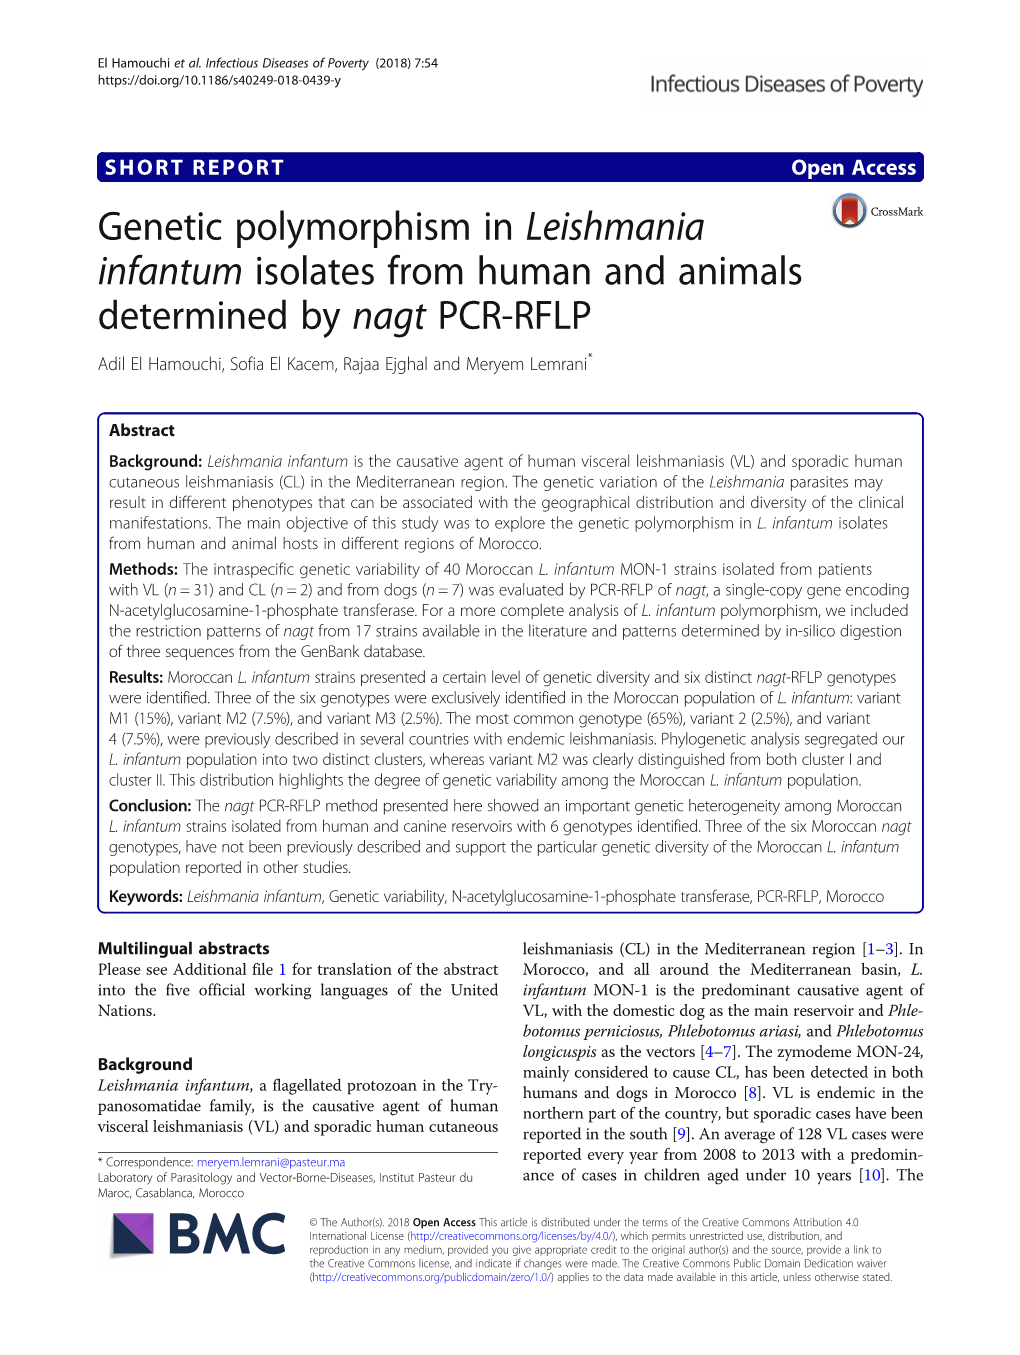 Genetic Polymorphism in Leishmania Infantum Isolates from Human And